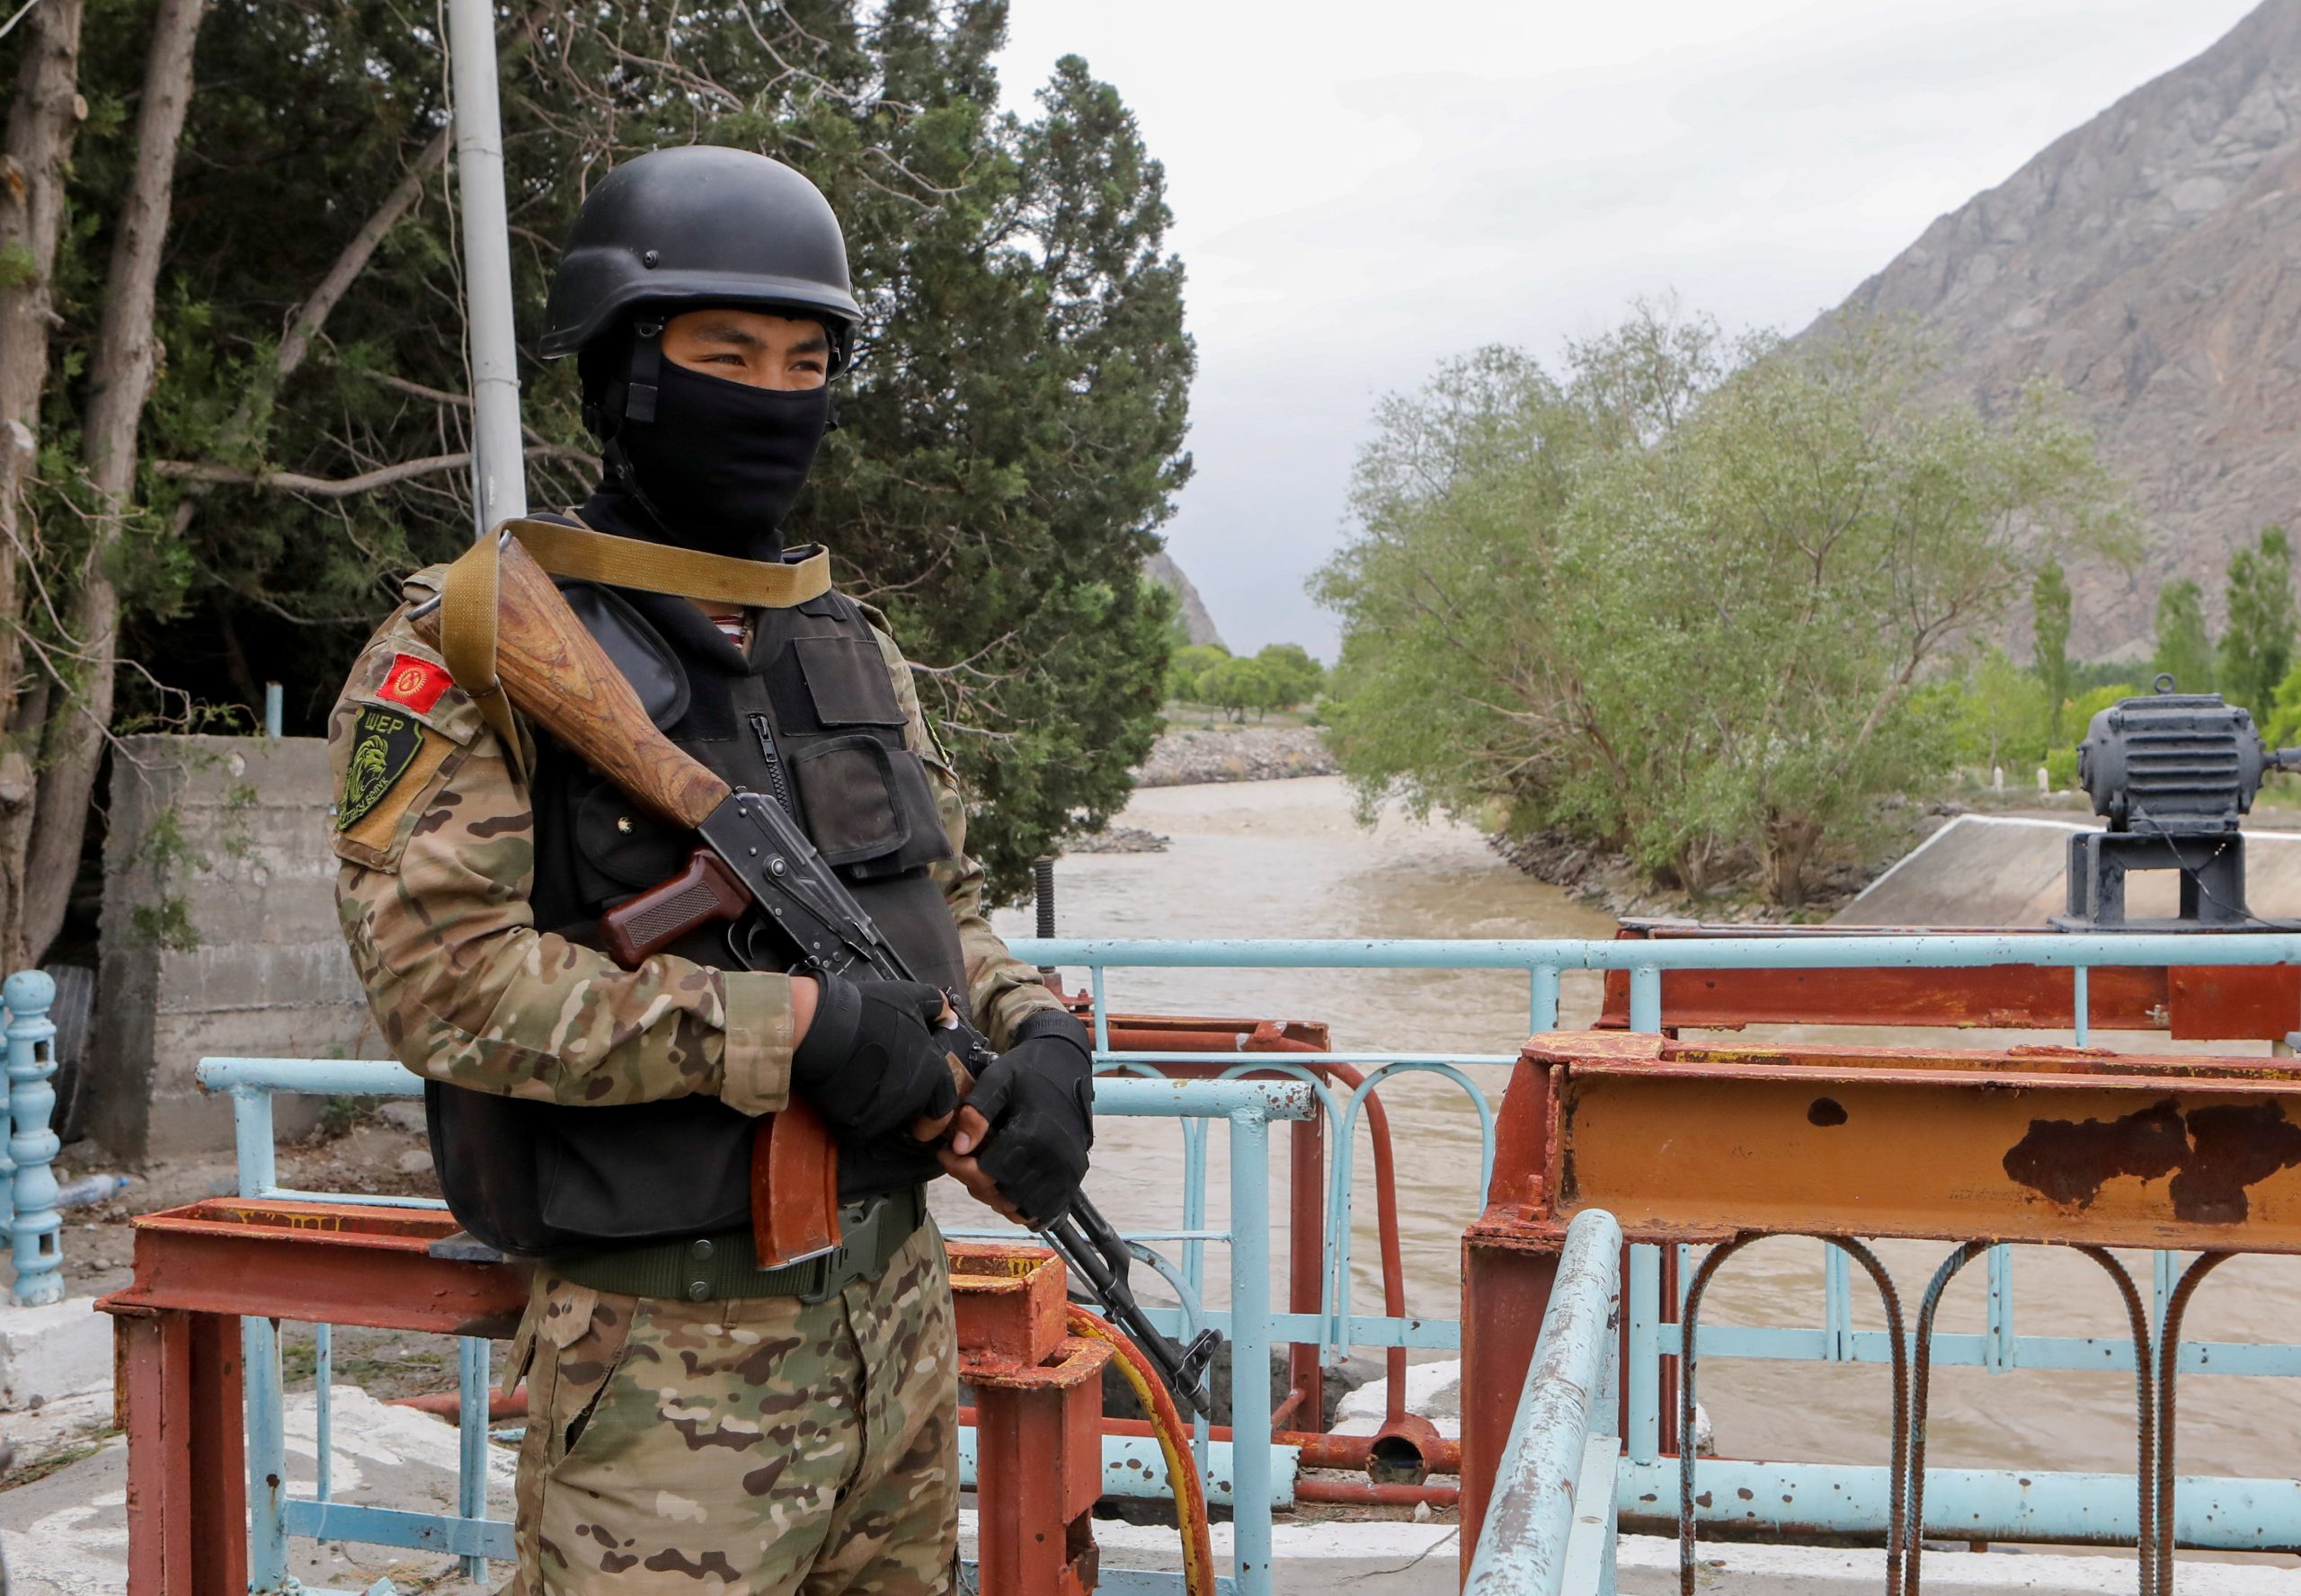 Photo: A service member of Kyrgyz special operations forces stands guard near Golovnoi water distribution facility outside the village of Kok-Tash in Batken province, Kyrgyzstan May 5, 2021. The clashes broke out last week along the frontier between Tajikistan's Sughd province and Kyrgyzstan's southern Batken province because of a dispute over a reservoir and pump, claimed by both sides, on the Isfara River. Credit: REUTERS/Vladimir Pirogov